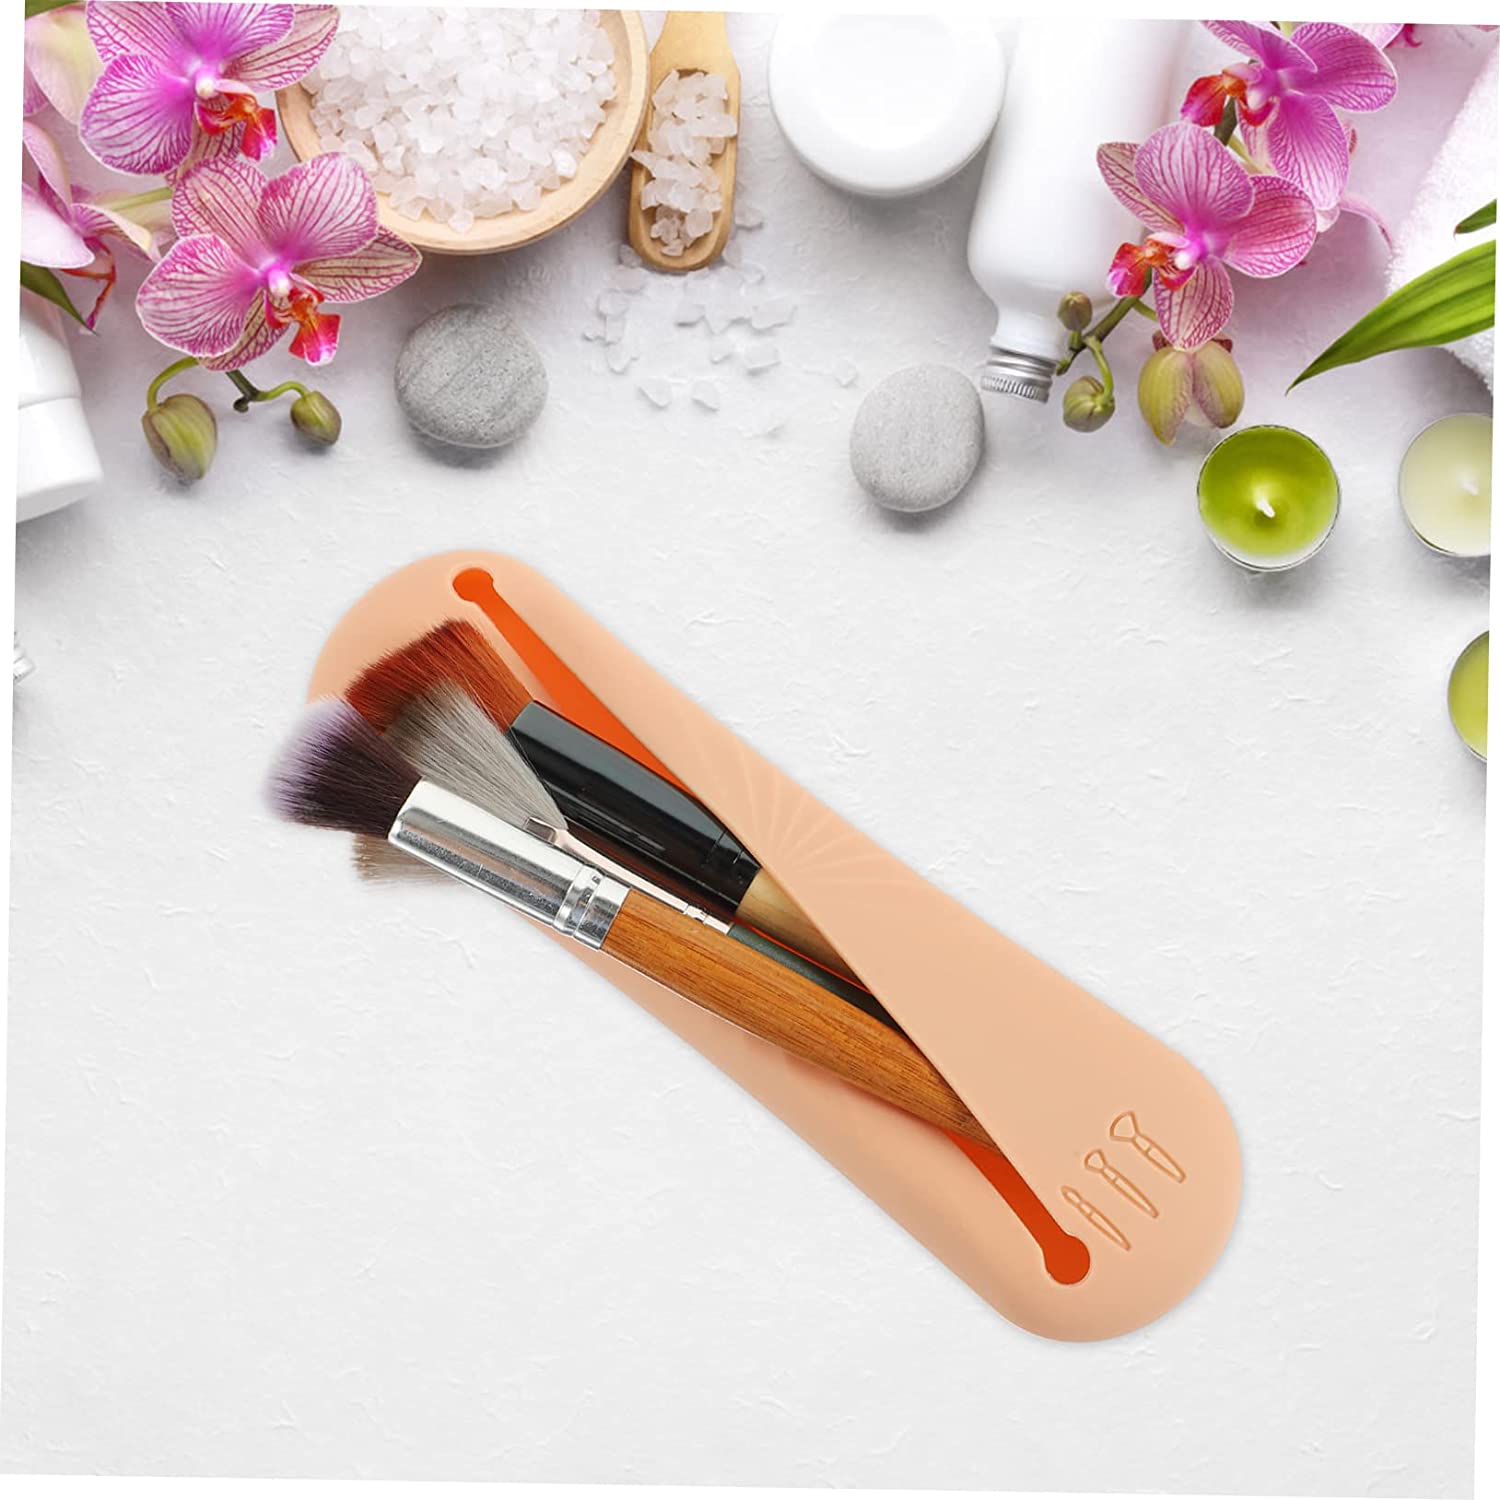 Makeup Brush Silicone Case Travel Brushes Makeup Silicone Makeup Applicator  Silicon Molds Sleek Travel Container Makeup Brush Bag Make up Brush Holder  Silicone Brush Storage Case 